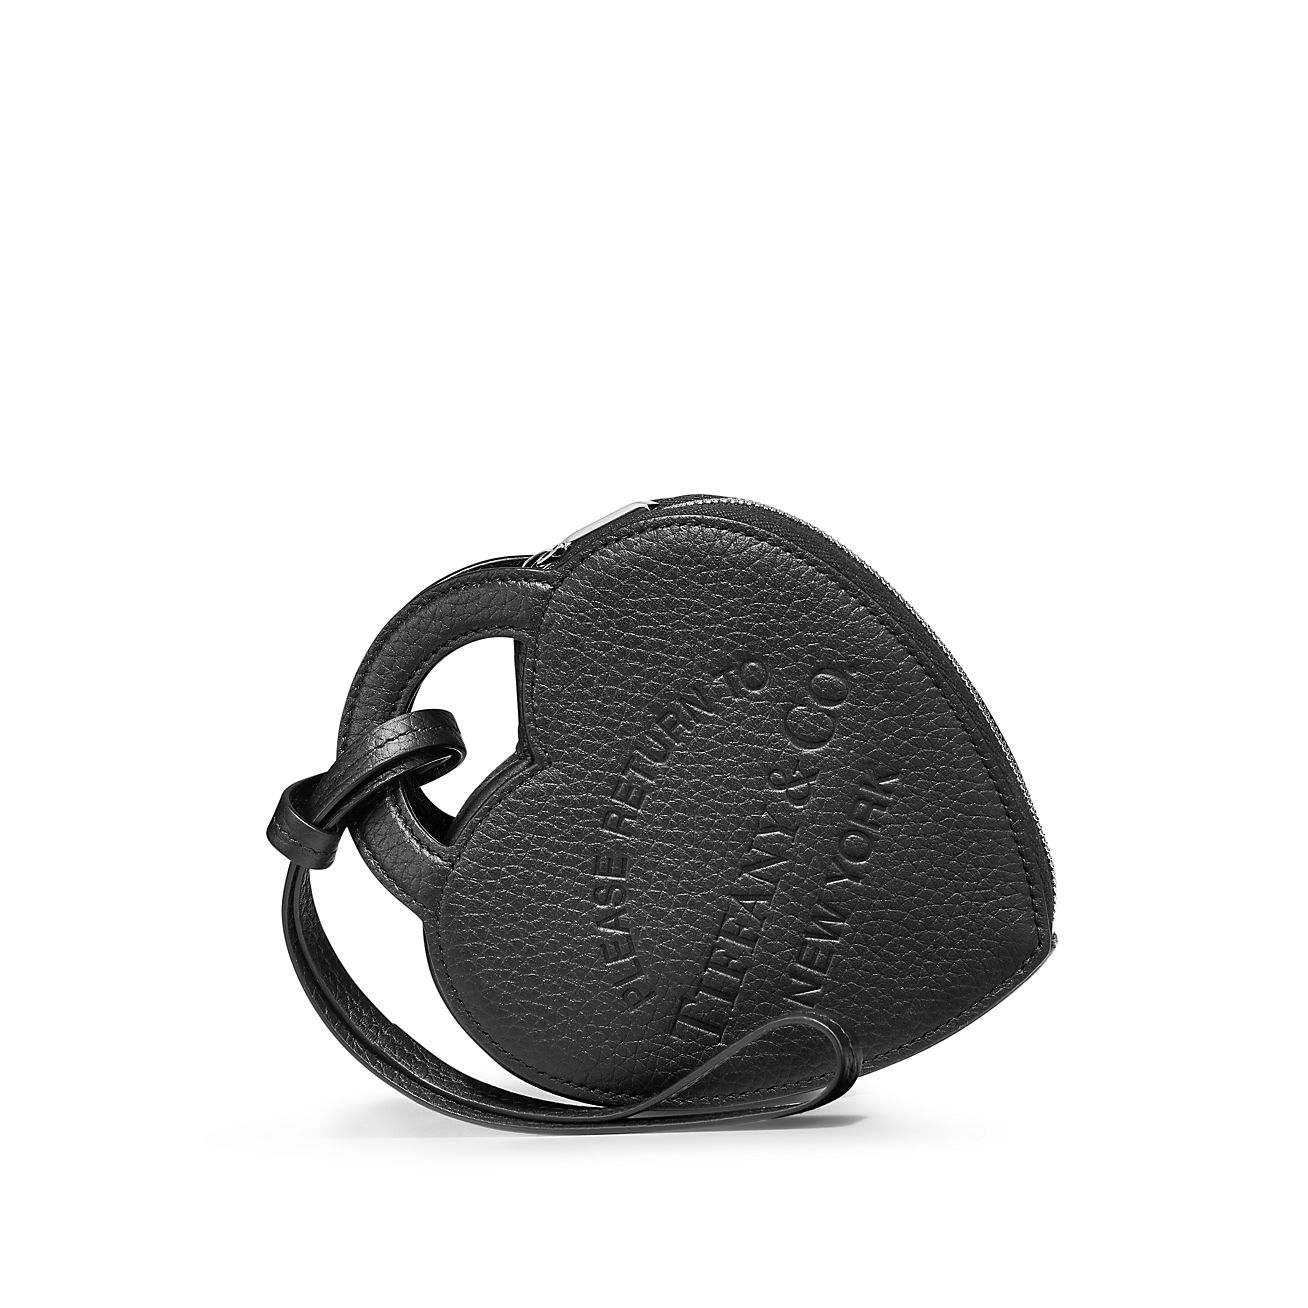 Return to Tiffany® Coin Case in Black Leather | Tiffany & Co.